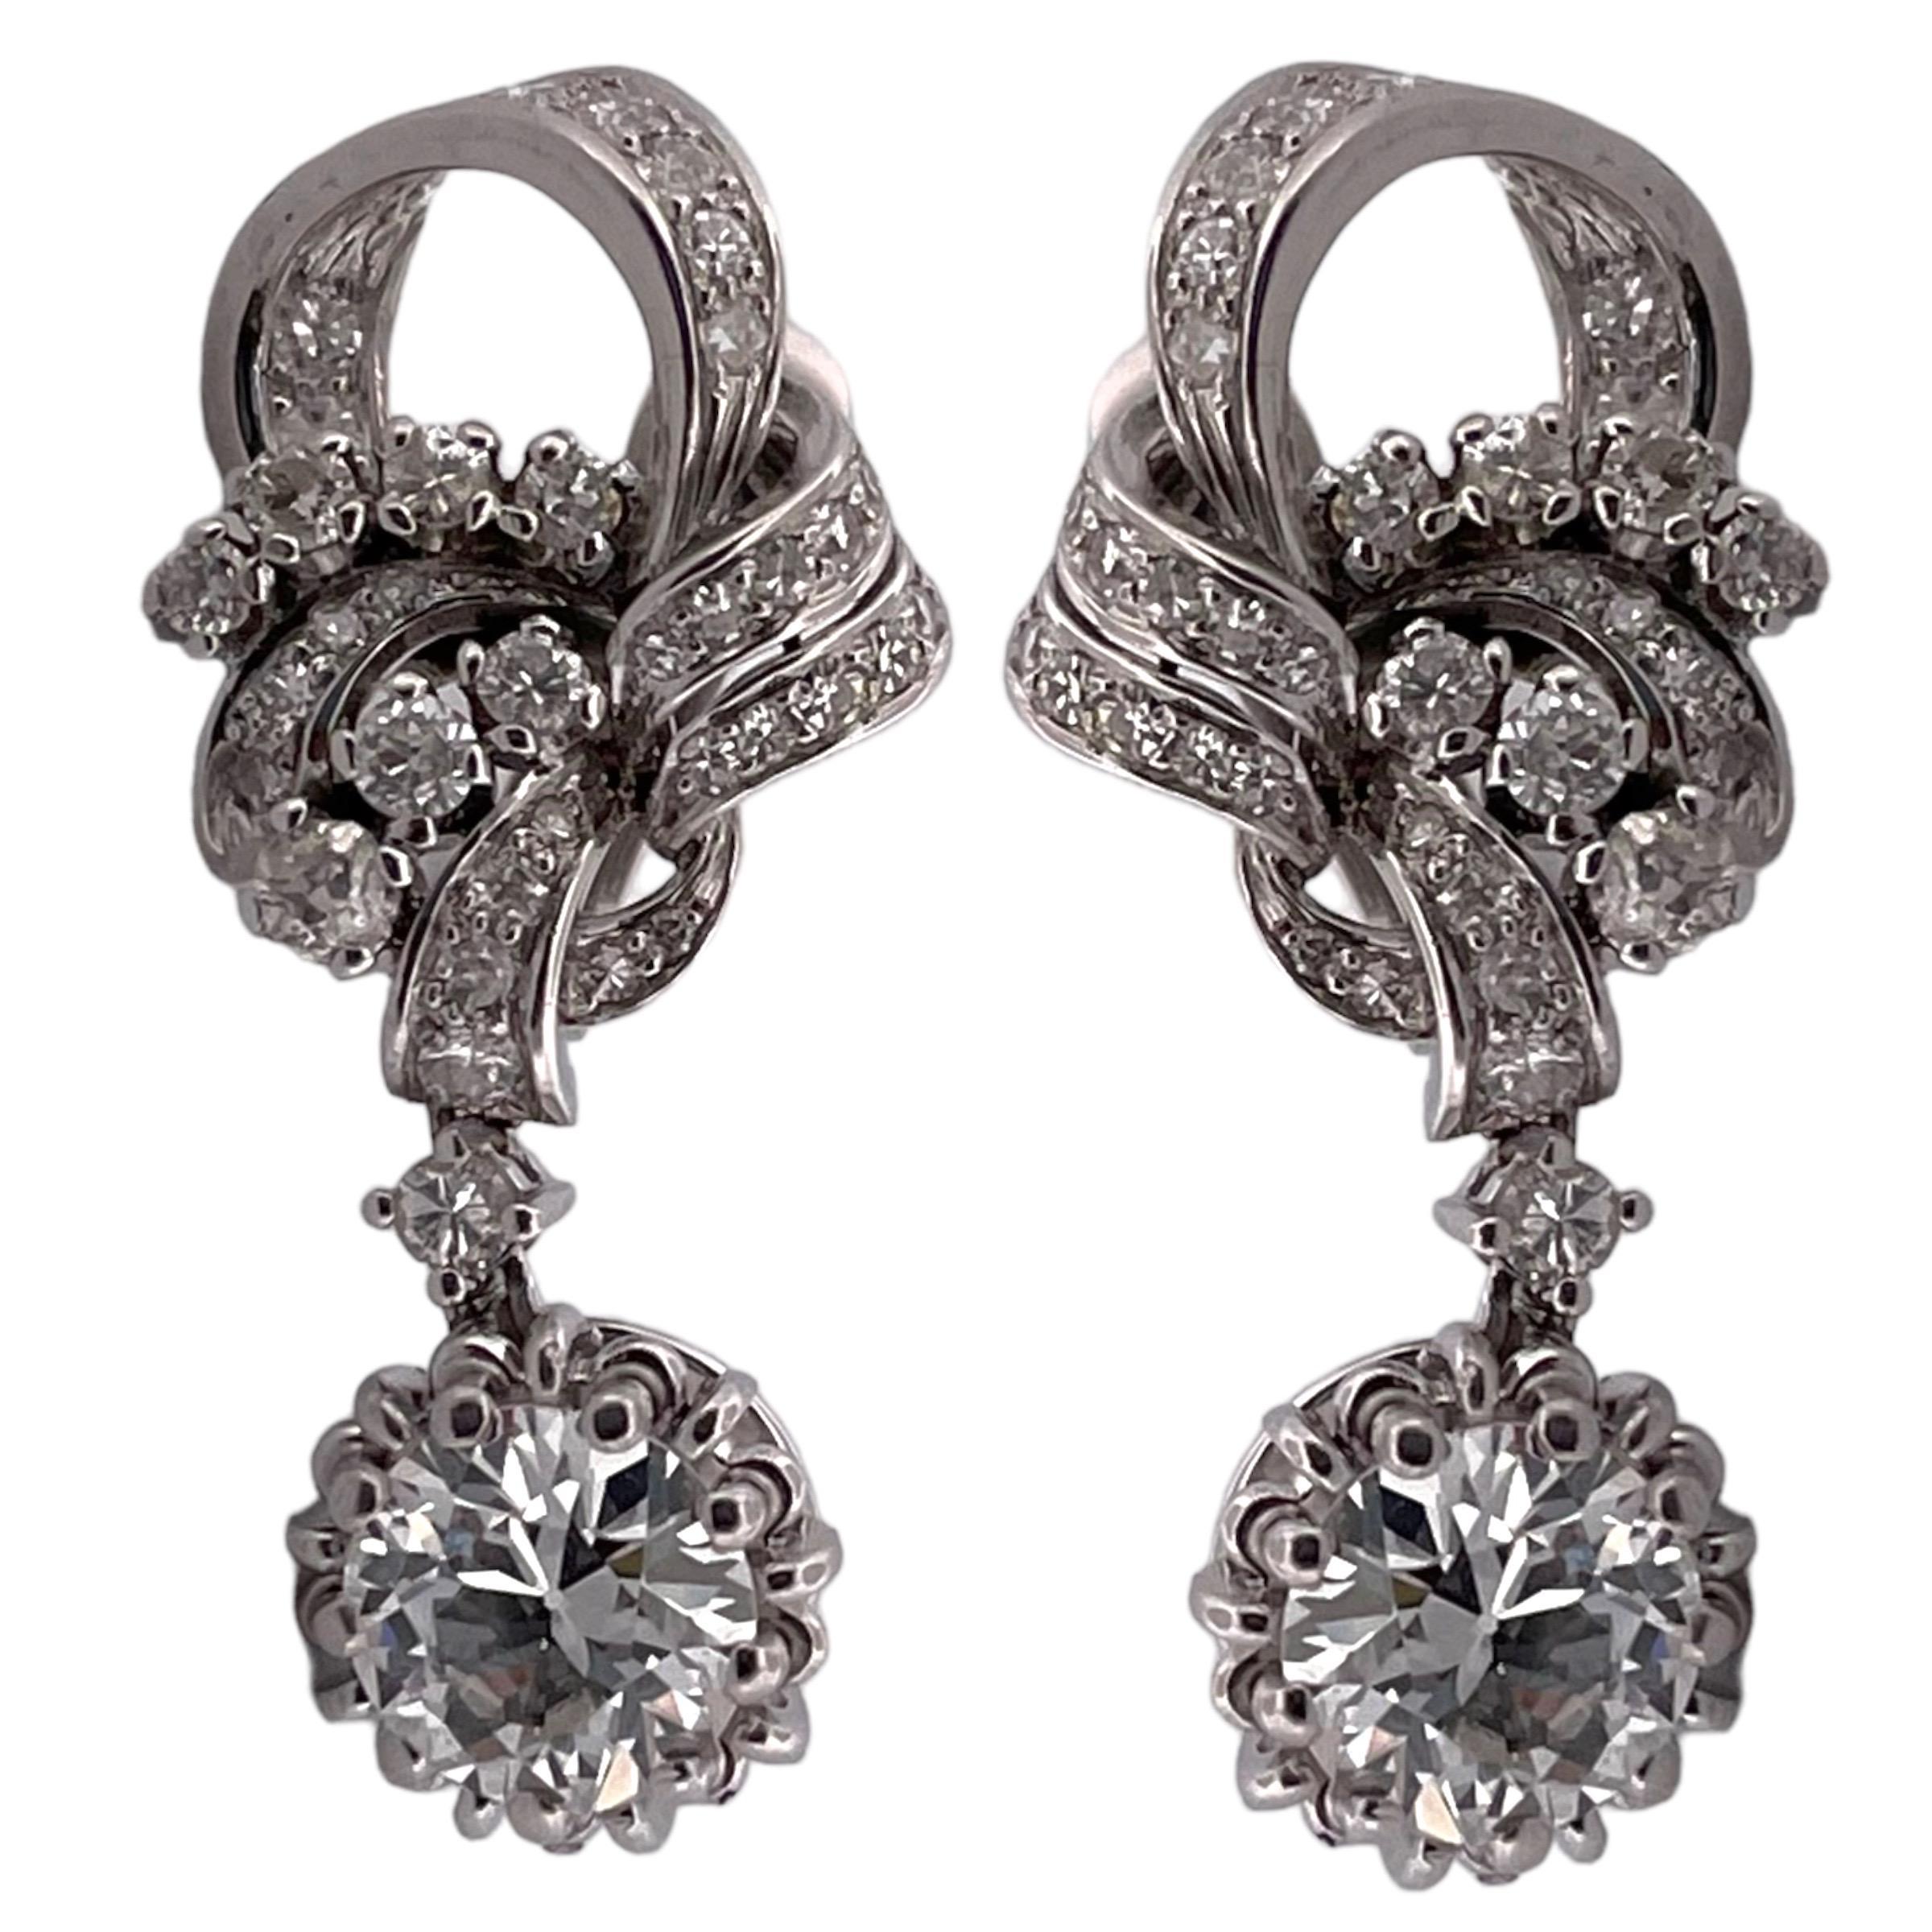 Discover the elegance of yesteryears with our exclusive GIA-certified platinum antique earrings, boasting a total carat weight (TCW) of 3.44. These exquisite vintage pieces blend timeless craftsmanship with the luxury of platinum, making them a